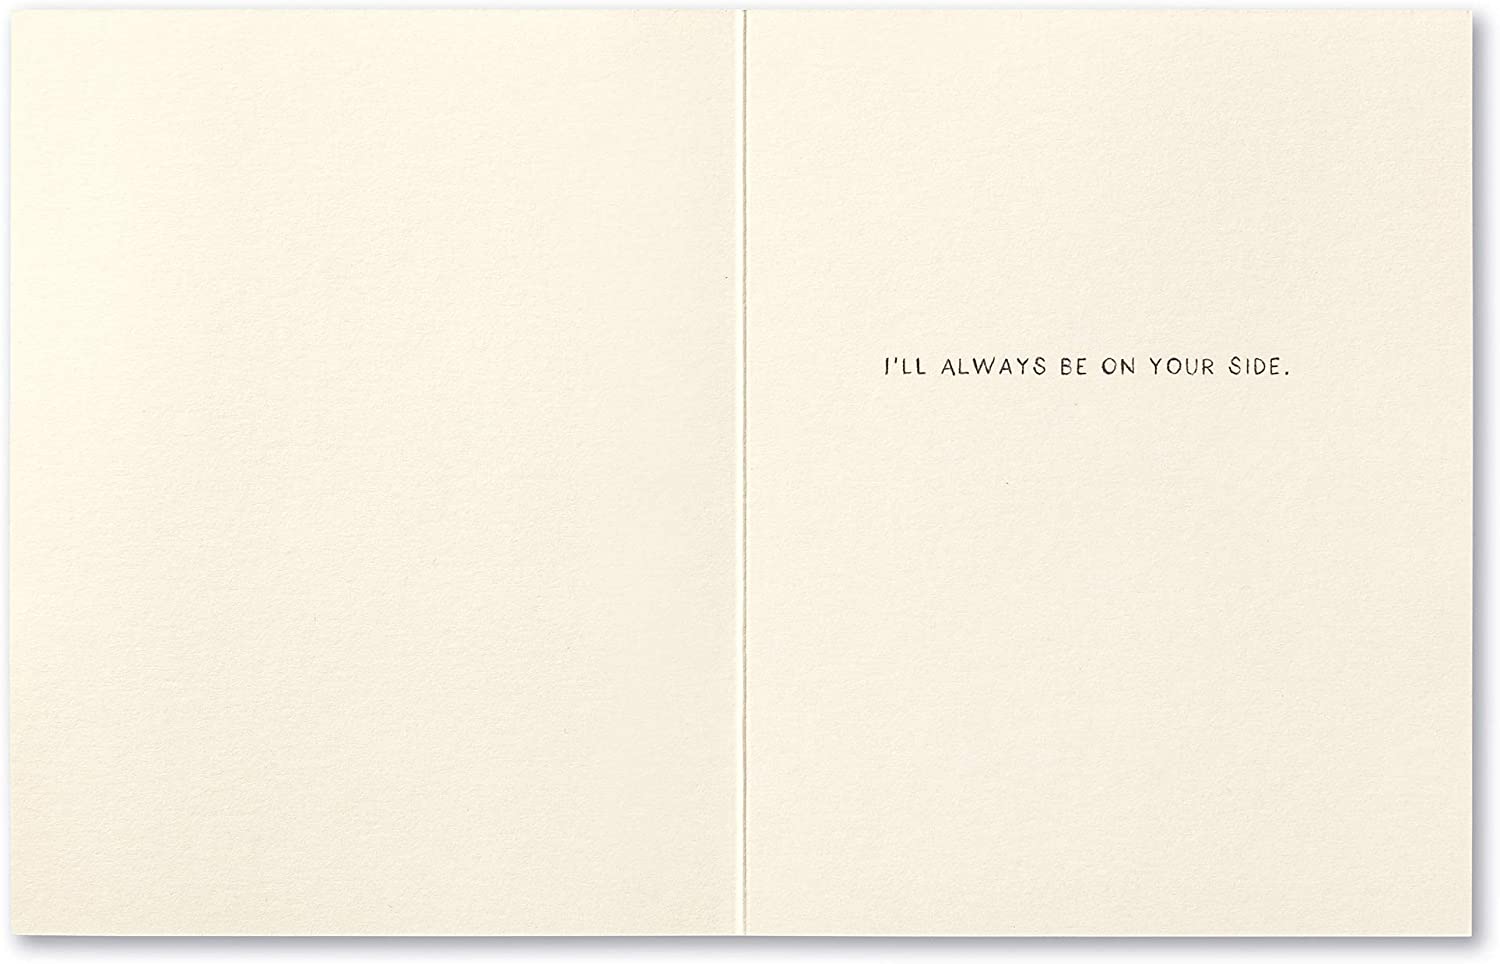 Love Muchly Greeting Card - Here For You - I'm Not Going Anywhere - Mellow Monkey